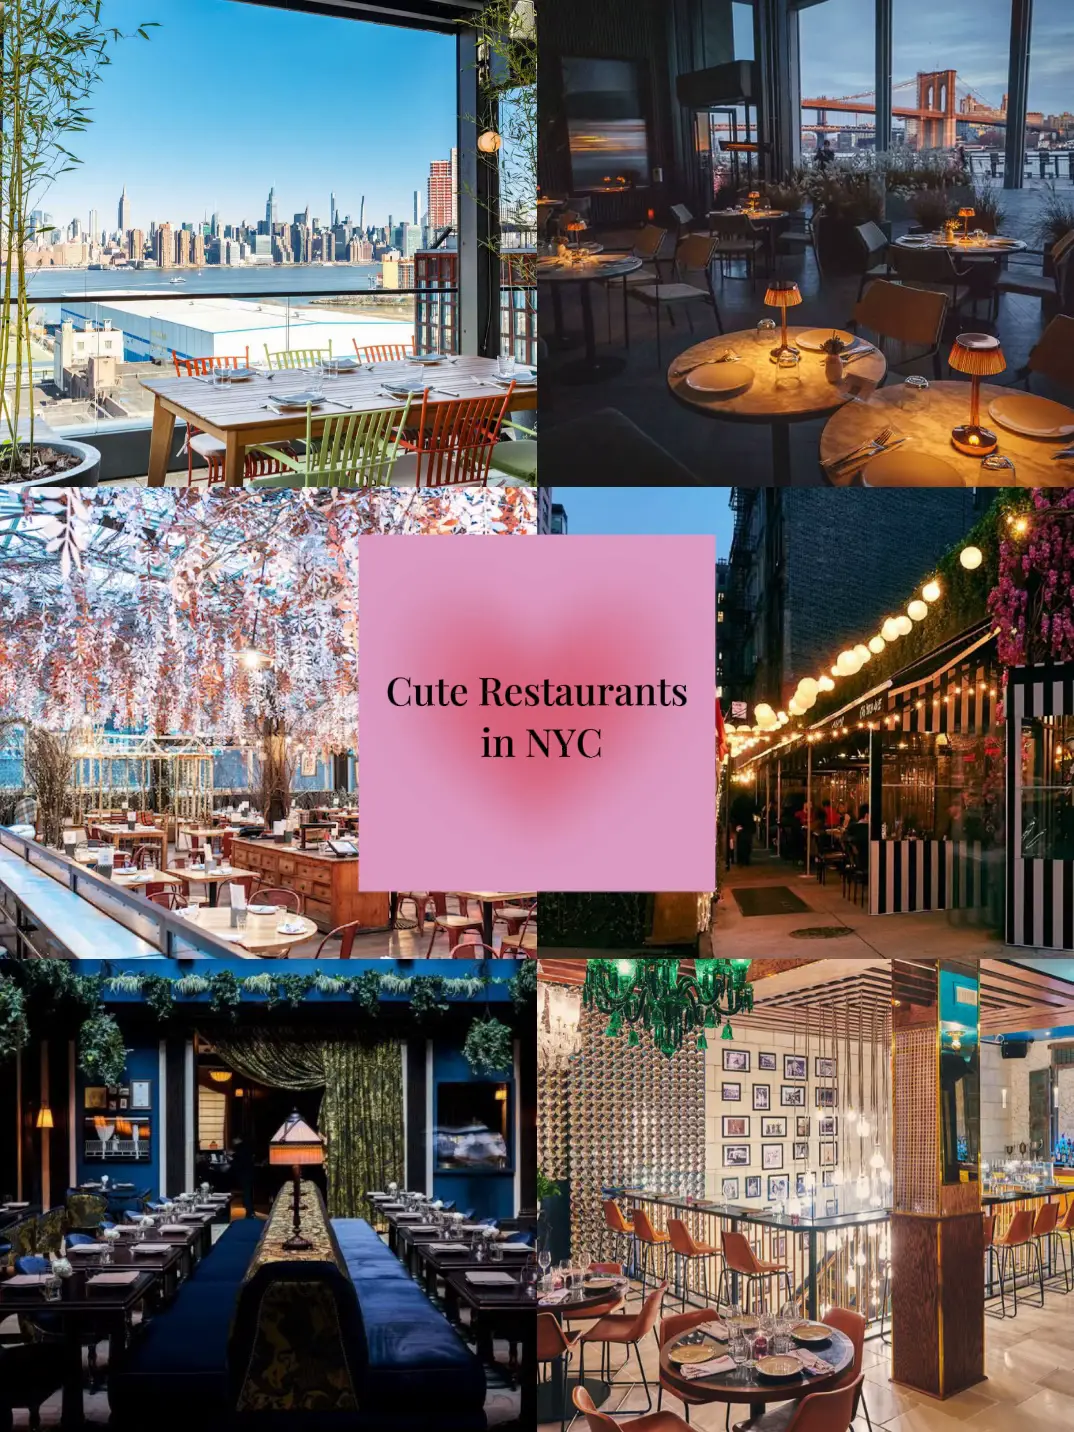  A collage of pictures of restaurants in New York City.